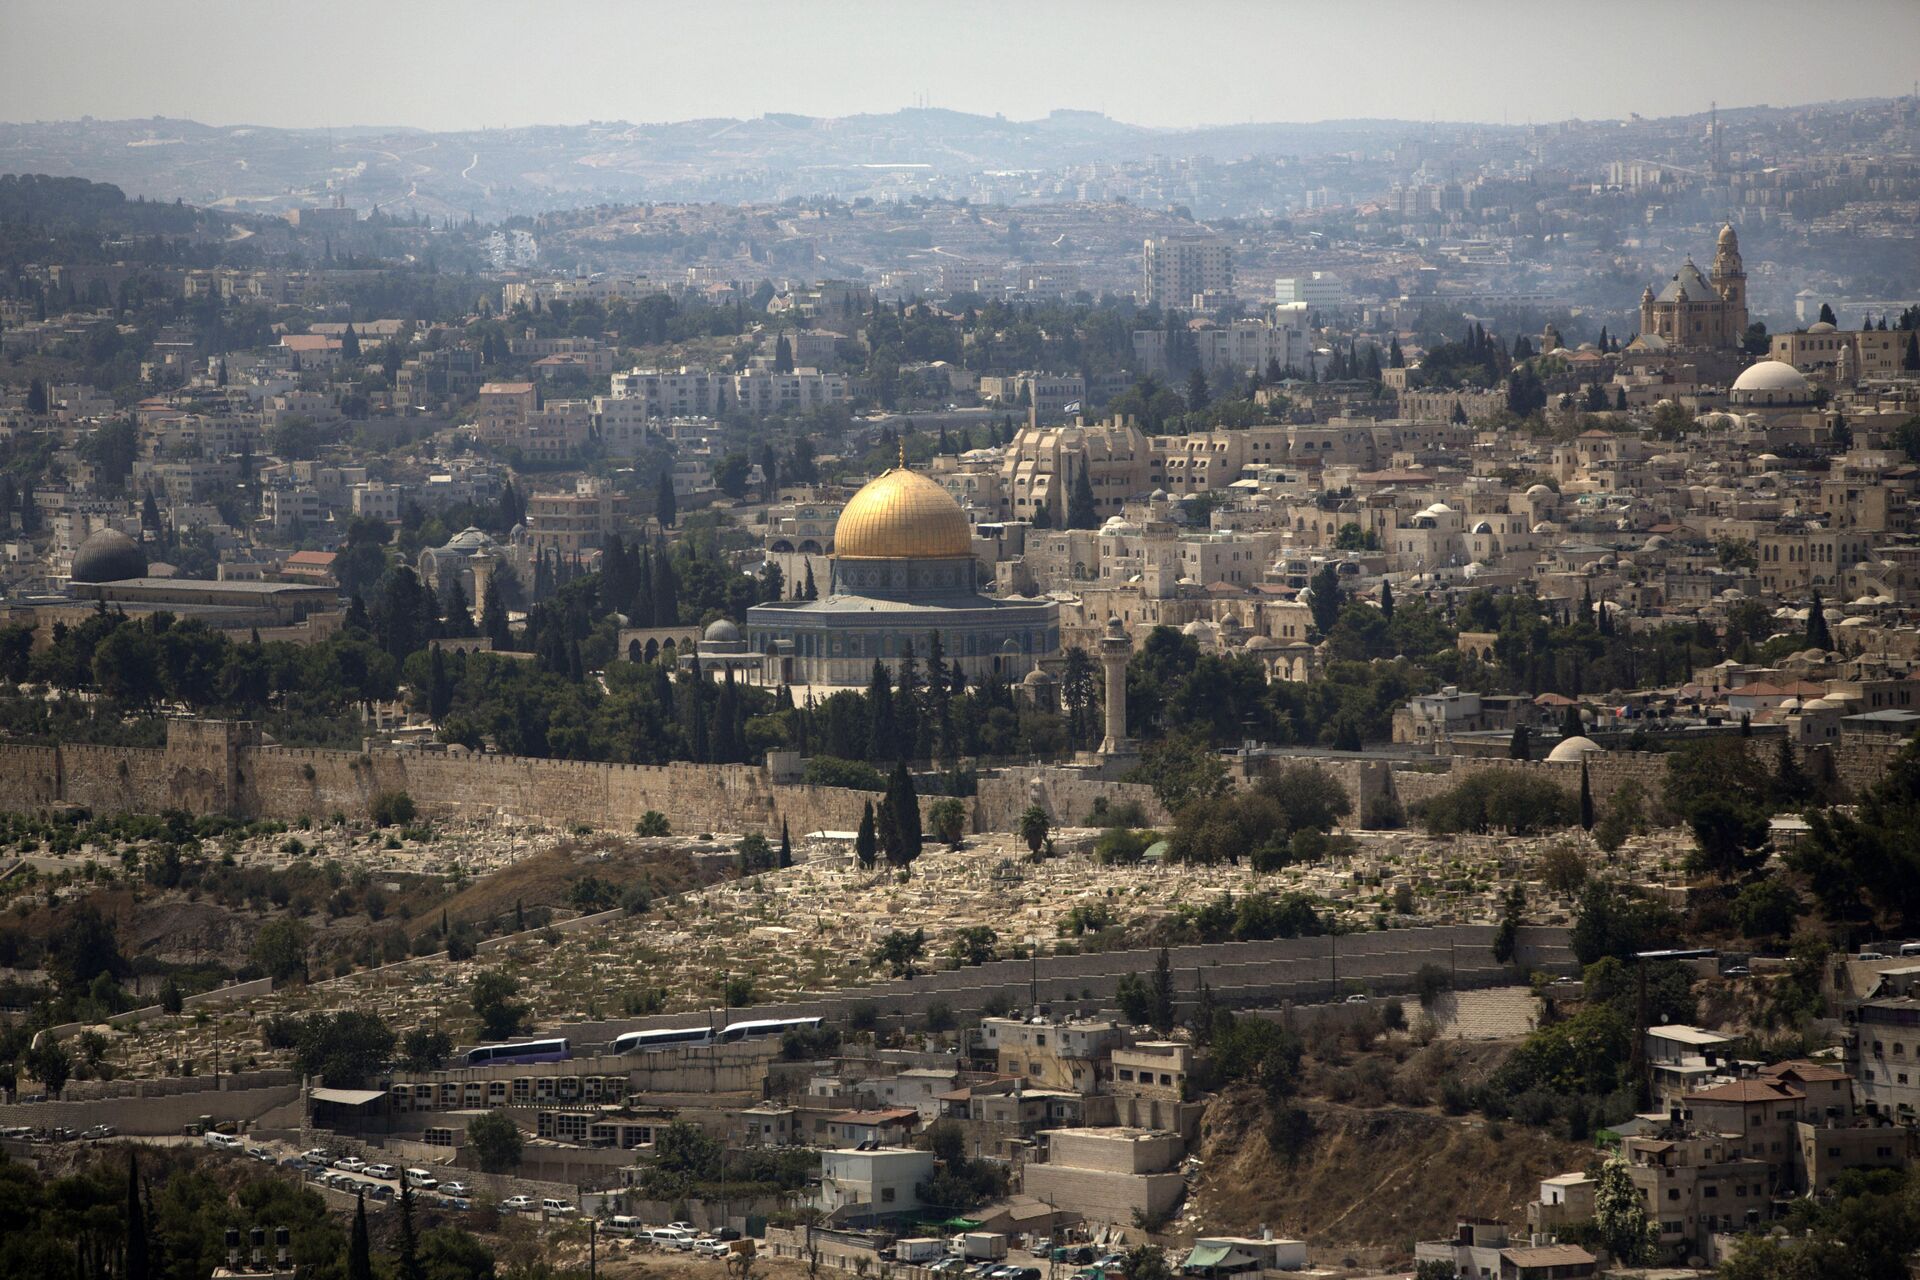 In this Monday, Sept. 9, 2013 file photo, the Dome of the Rock Mosque in the Al Aqsa Mosque compound, known by the Jews as the Temple Mount, is seen in Jerusalem's Old City. 2014 was supposed to be a record-breaking year for tourist visits to Israel. But all that changed when this summer’s 50-day war between Israel and Hamas prompted jittery travelers to cancel trips en masse. Merchants in Jerusalem’s Old City say the feel the sting. The area’s cobblestone streets are typically chock full of tourists visiting the holy sites within the storied walls. But they've been eerily empty over the summer. - Sputnik International, 1920, 13.12.2021